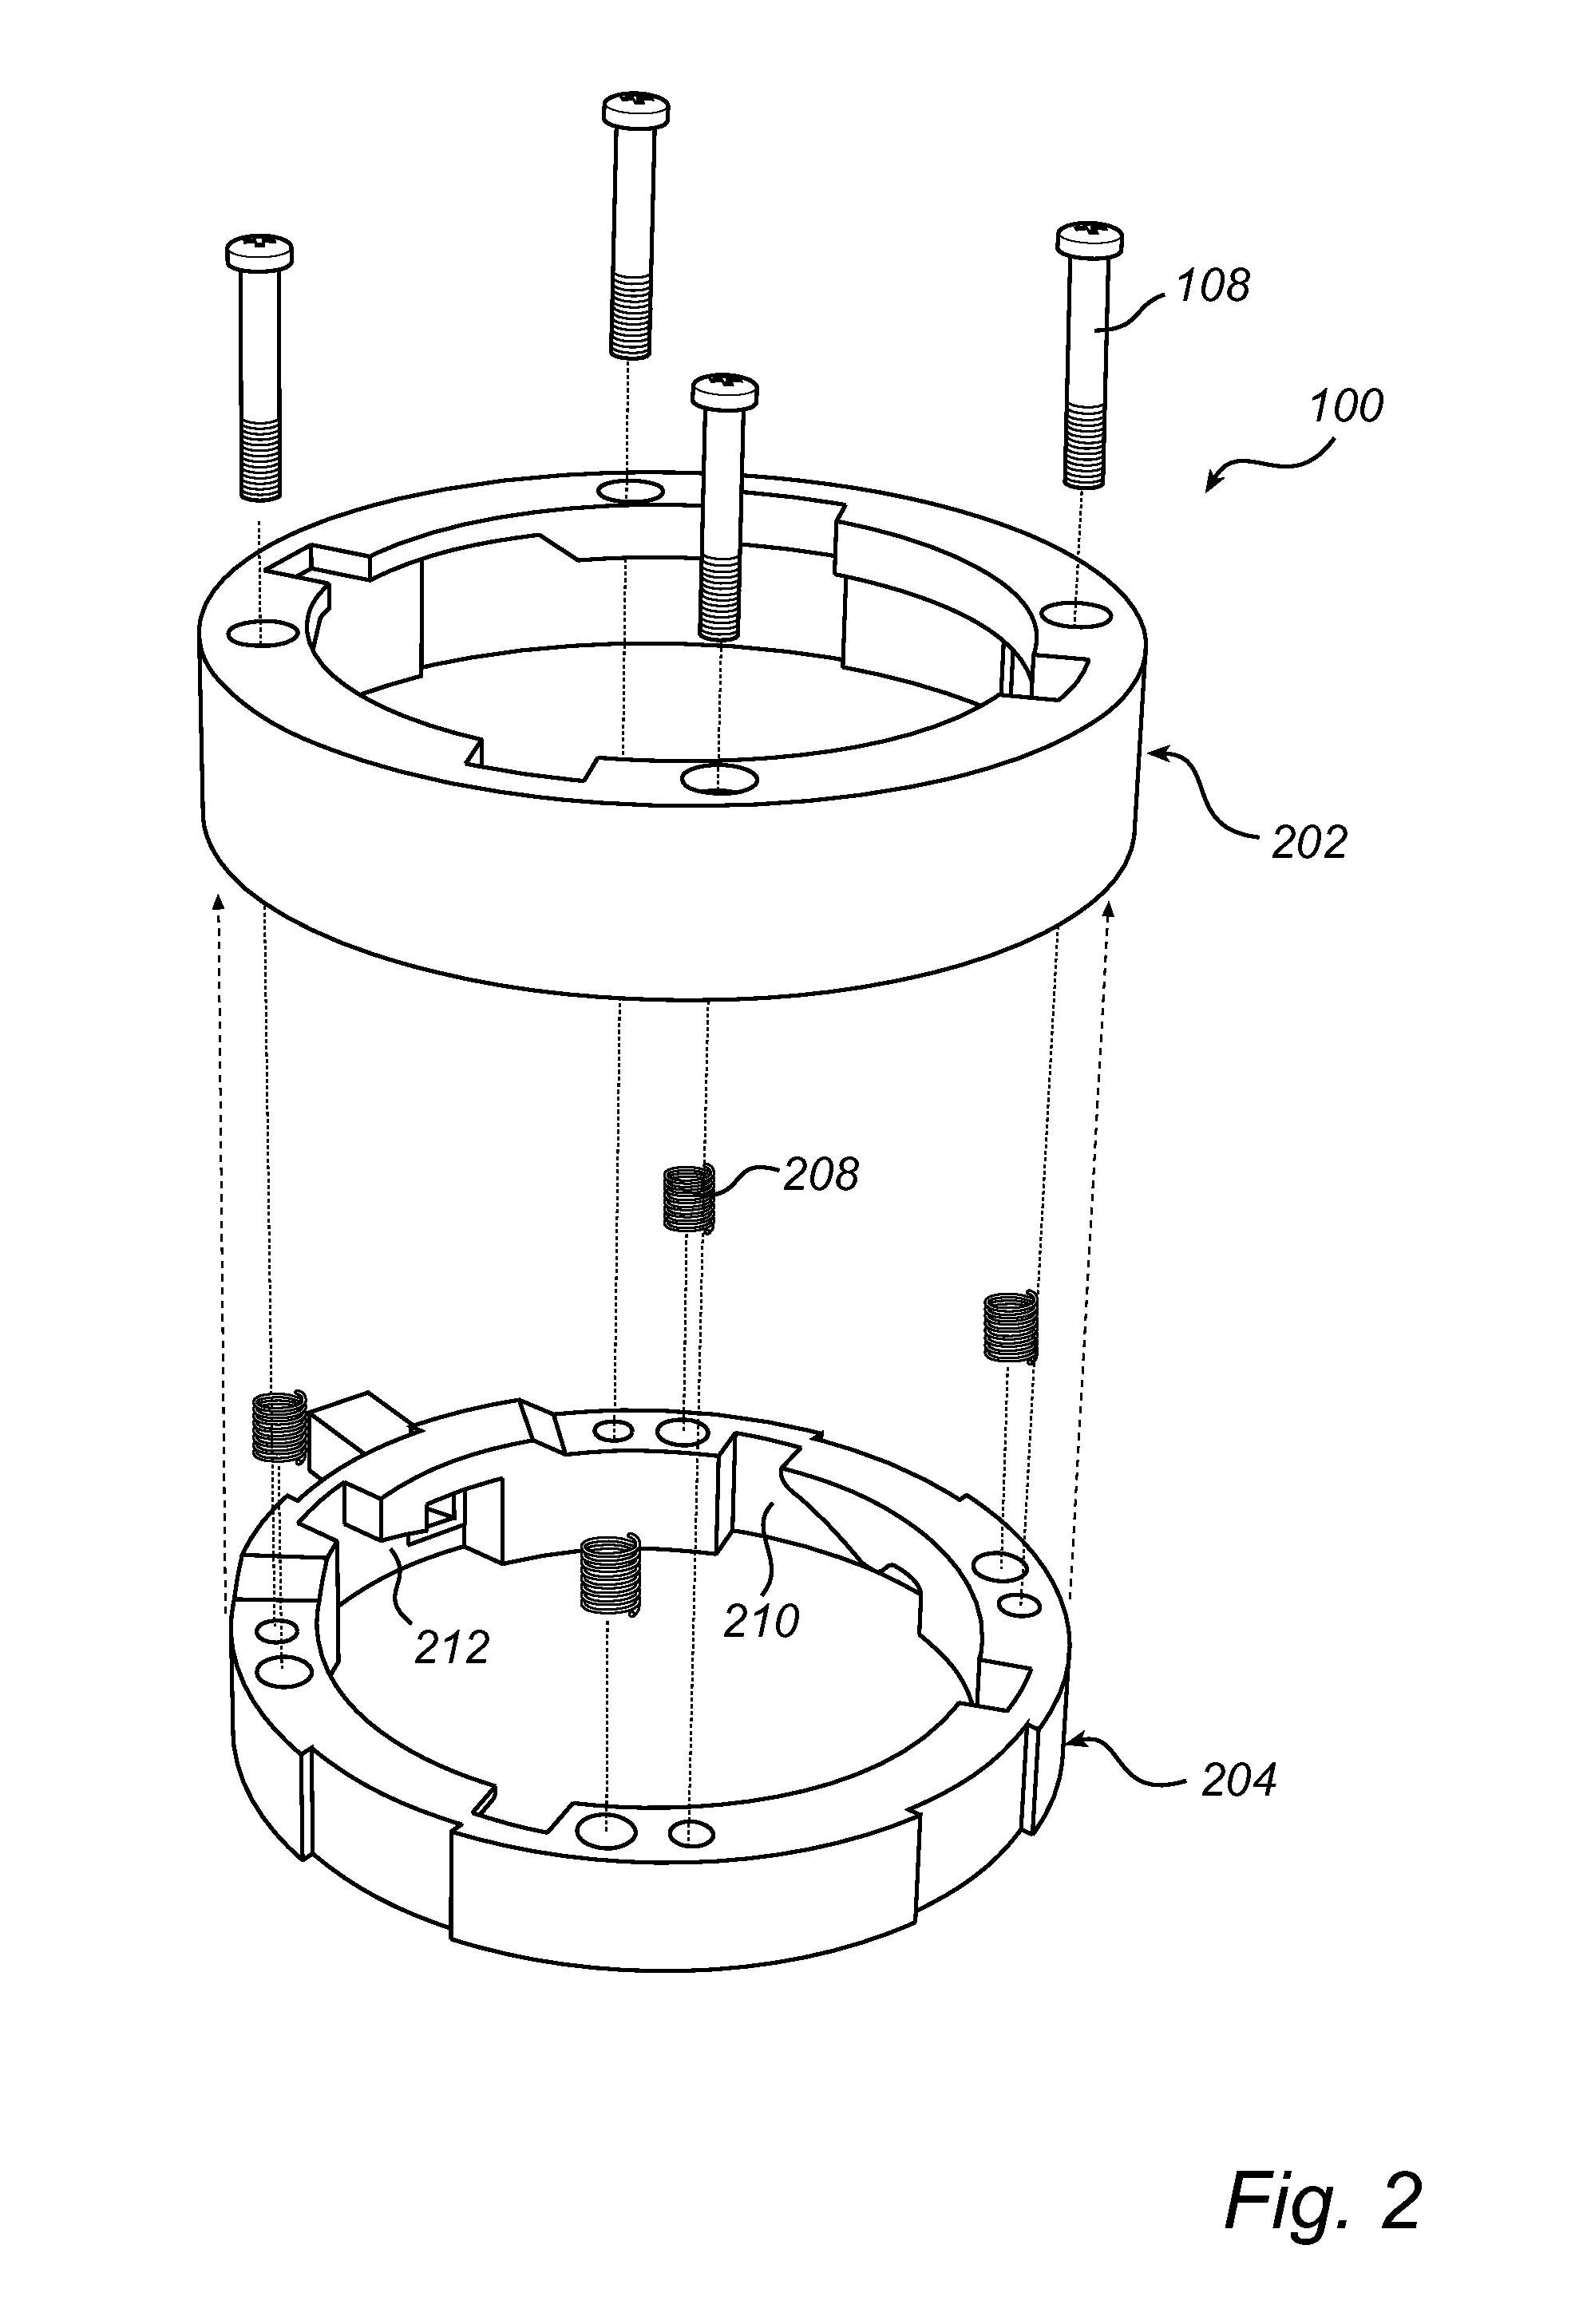 Connector for connecting a component to a heat sink